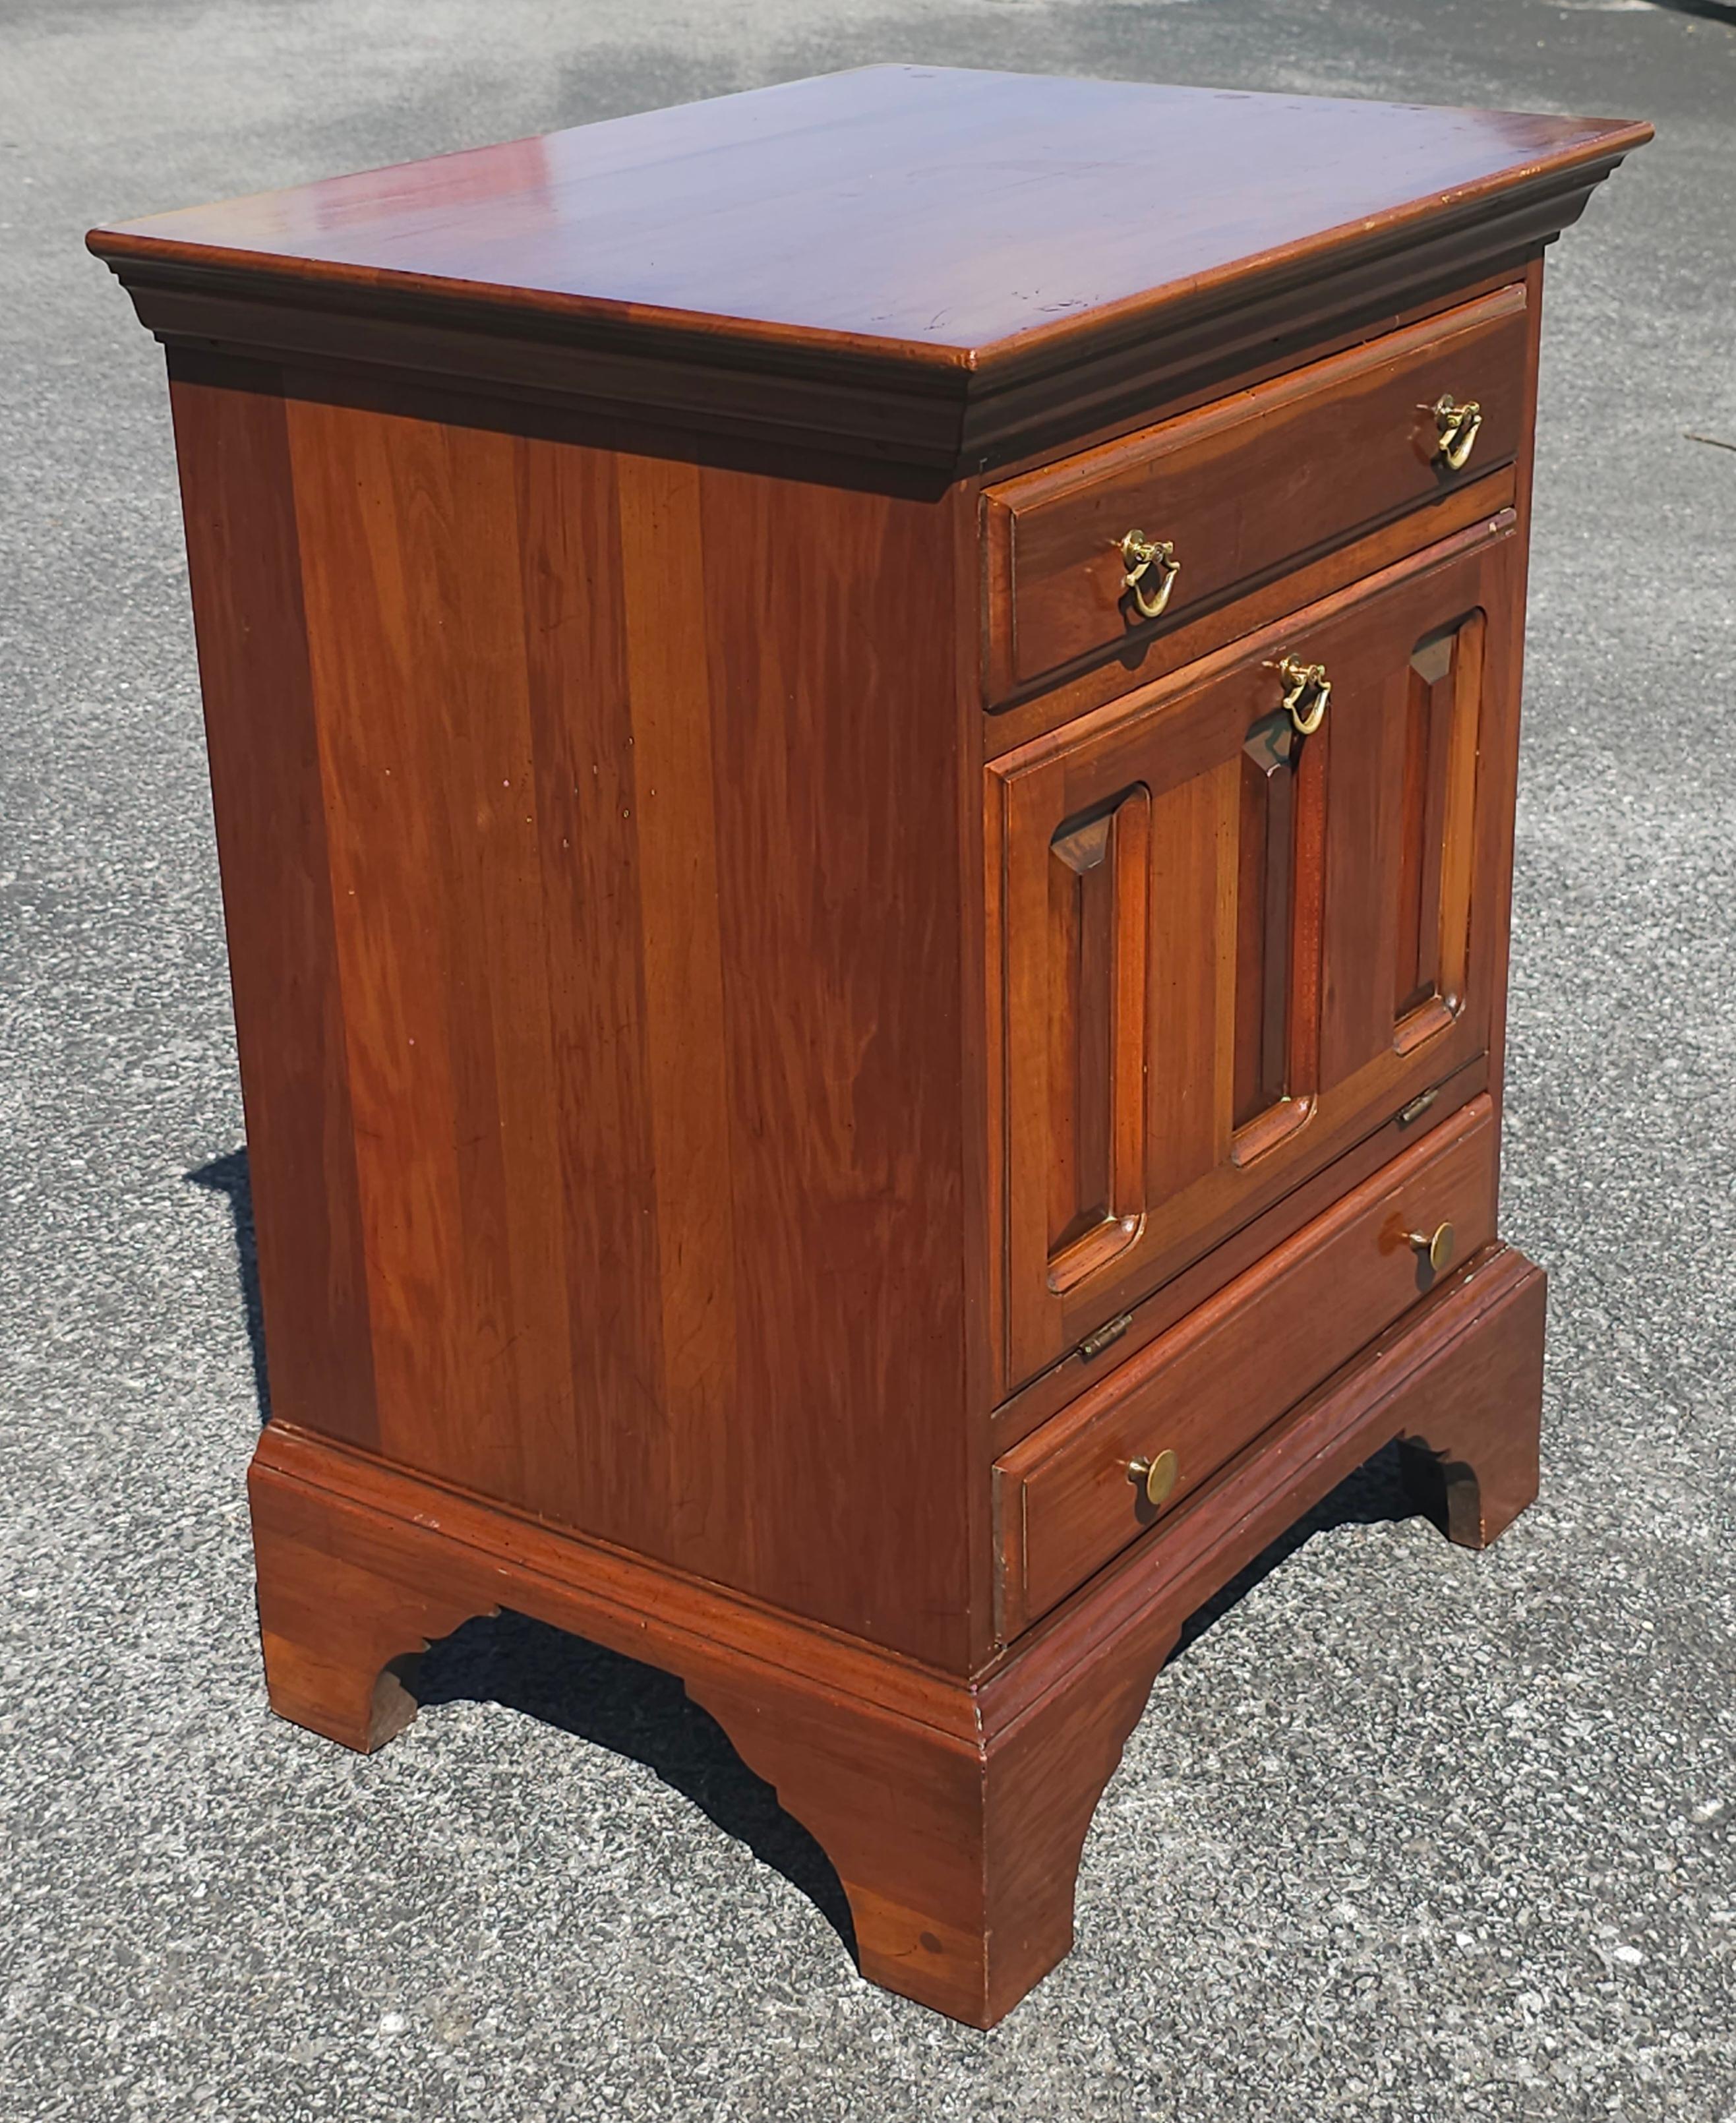 20th Century David Cabinet Cherry 2-Drawer a Abattant Door Bedside Cabinets Pair For Sale 10